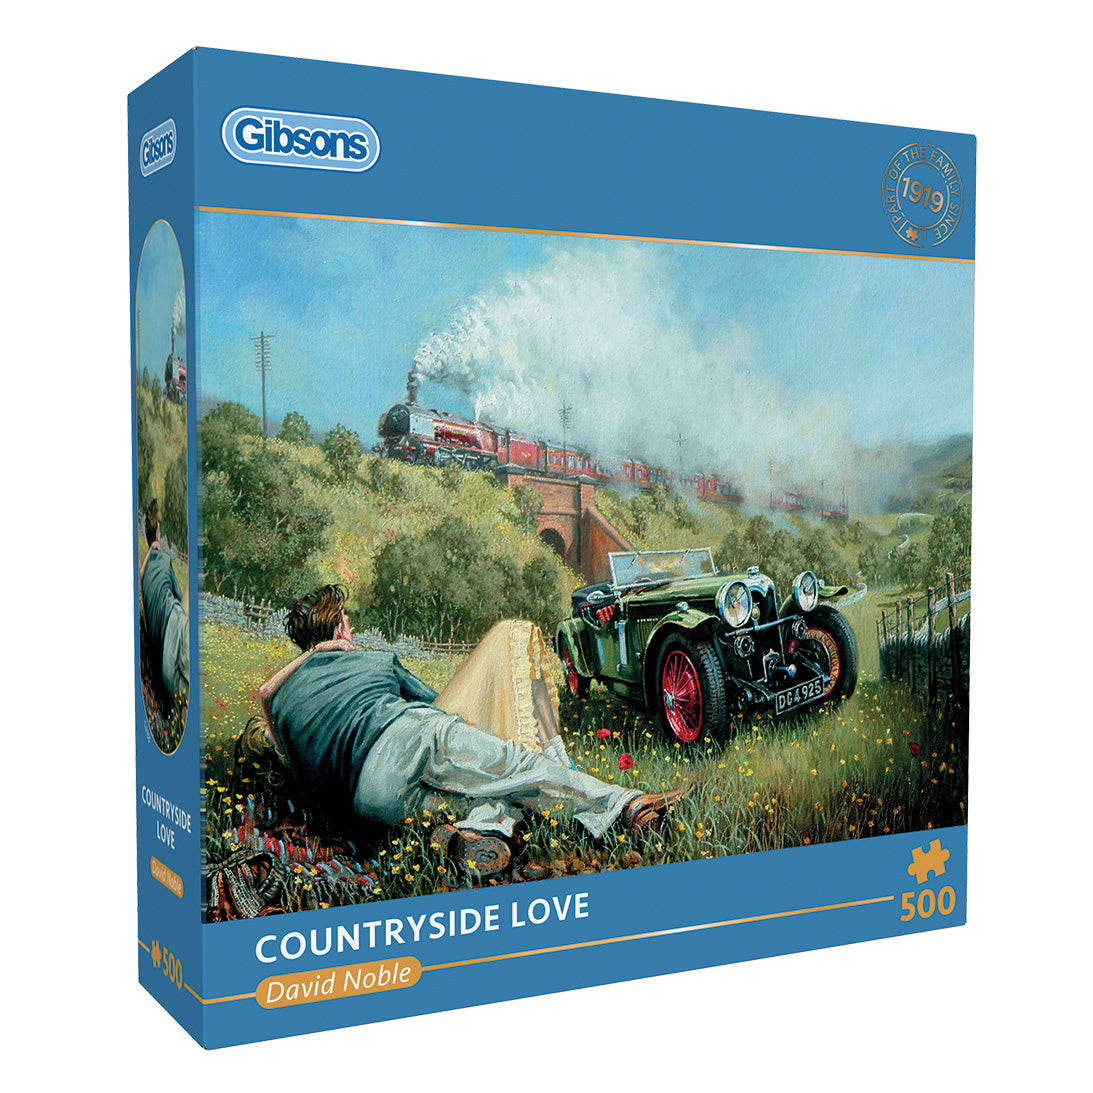 Gibsons - Countryside Love - 500 Piece Jigsaw Puzzle